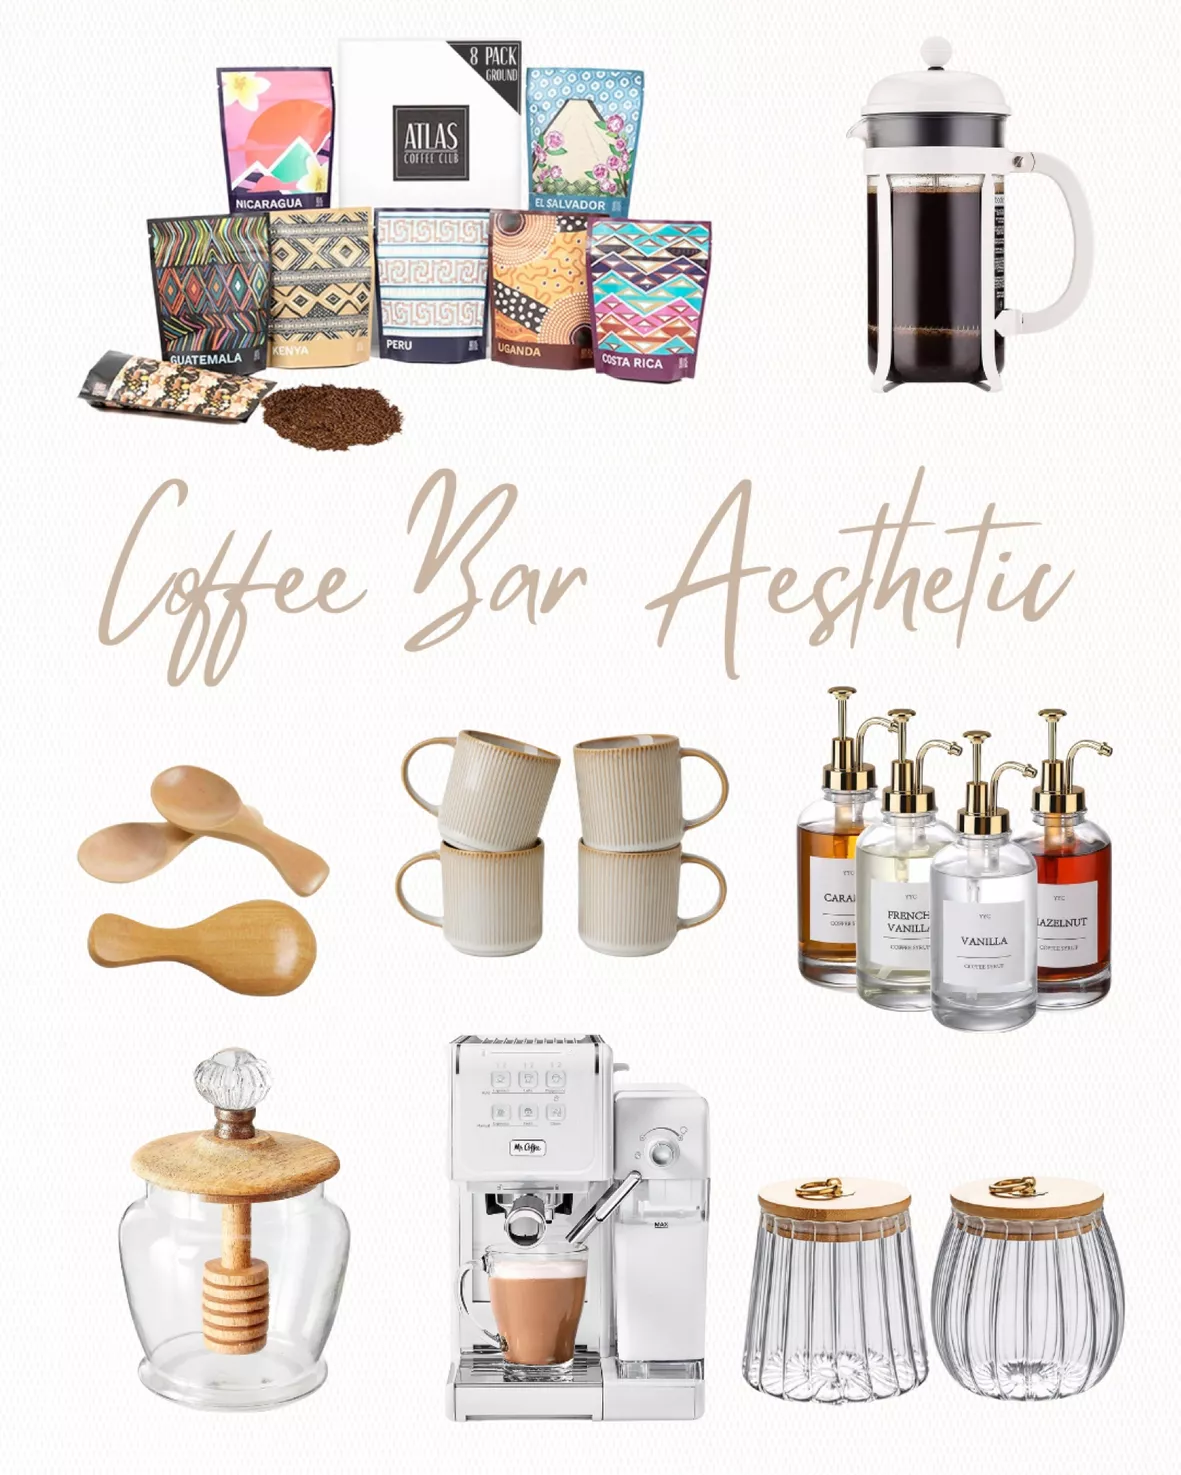 Accessories - Coffee Series